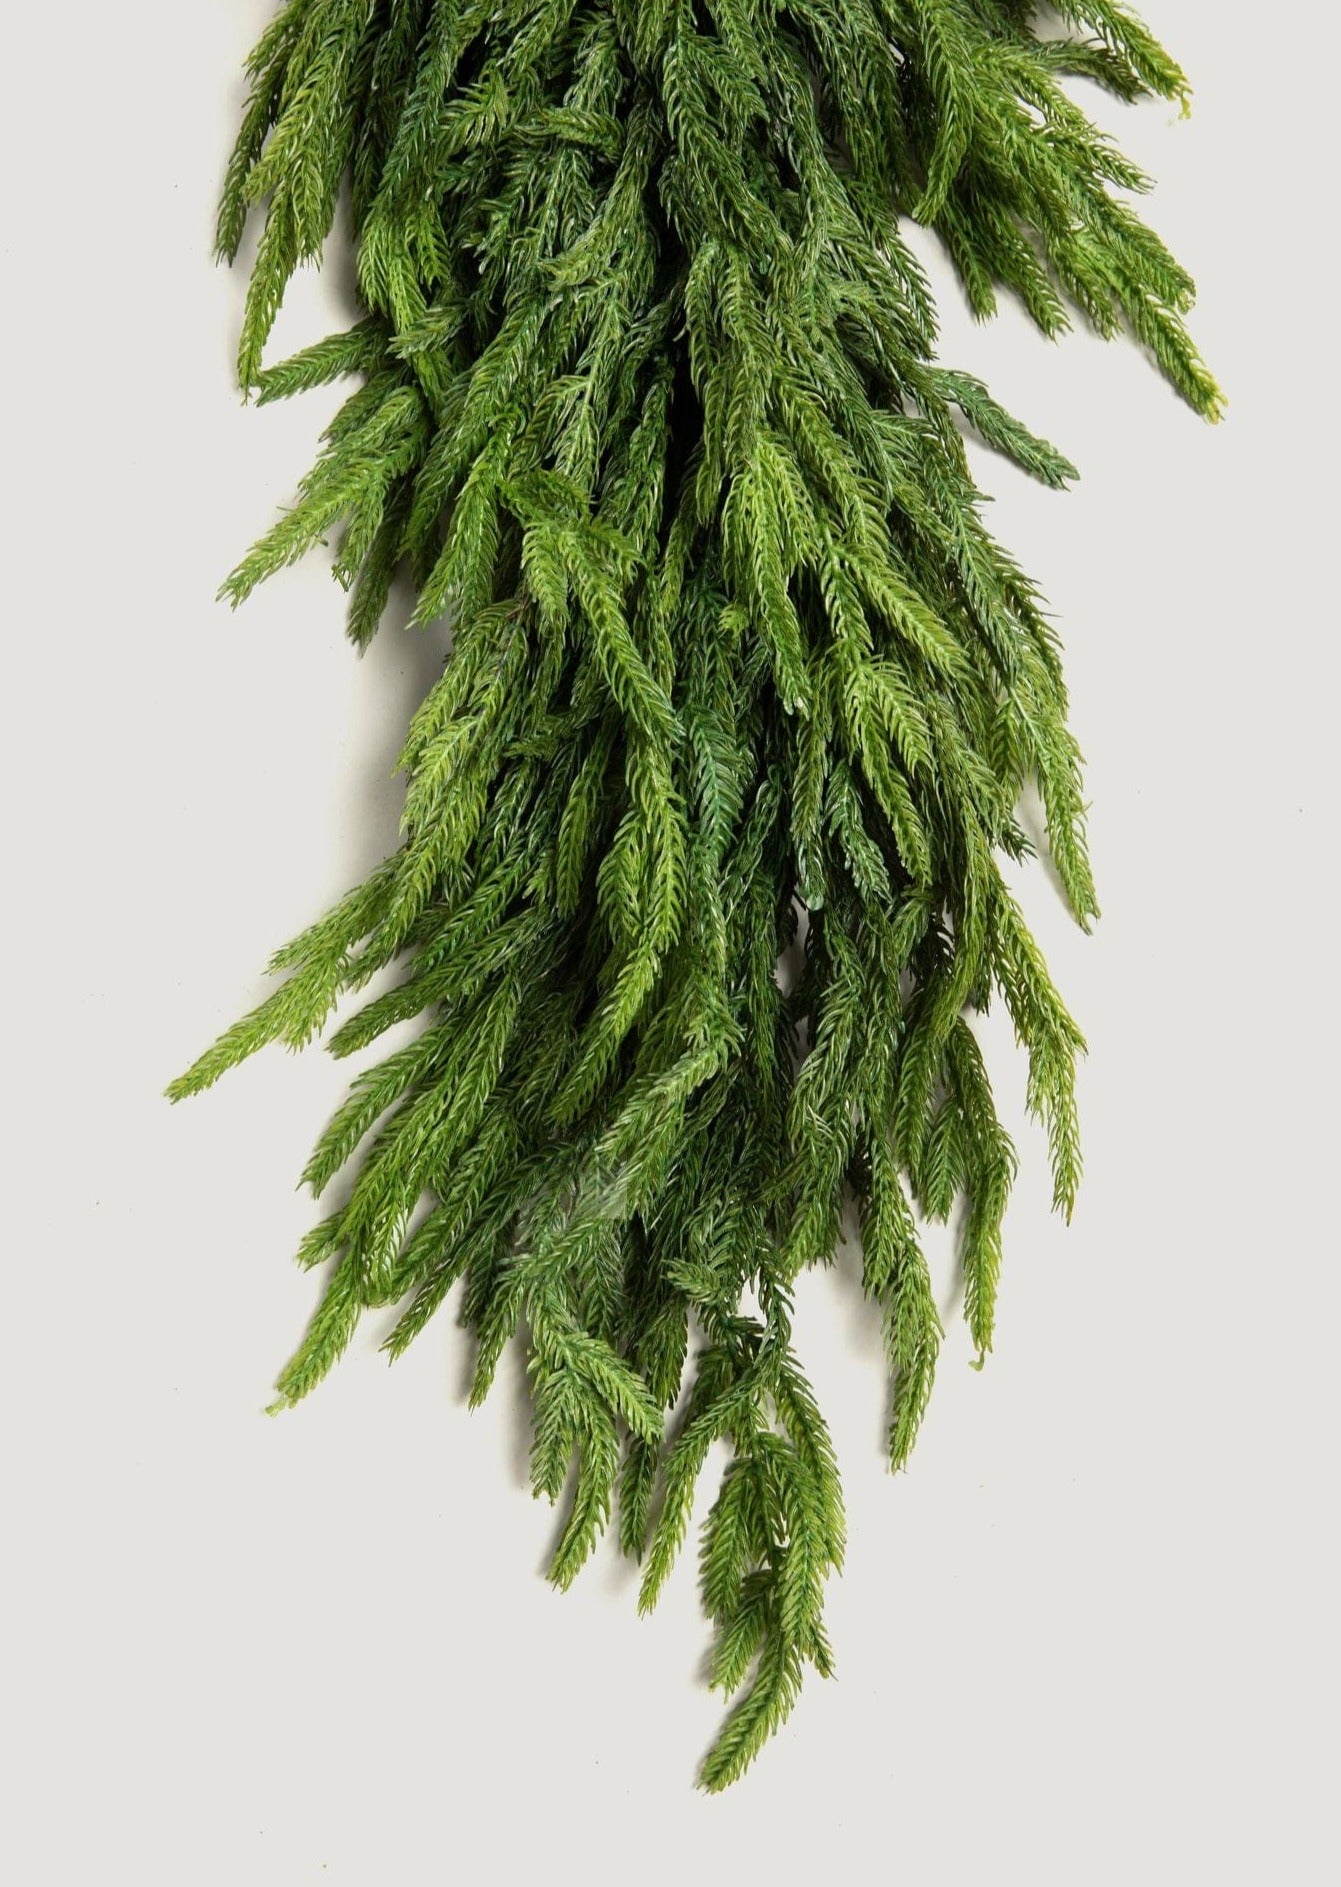 End of the Deluxe Artificial Norfolk Pine Garland